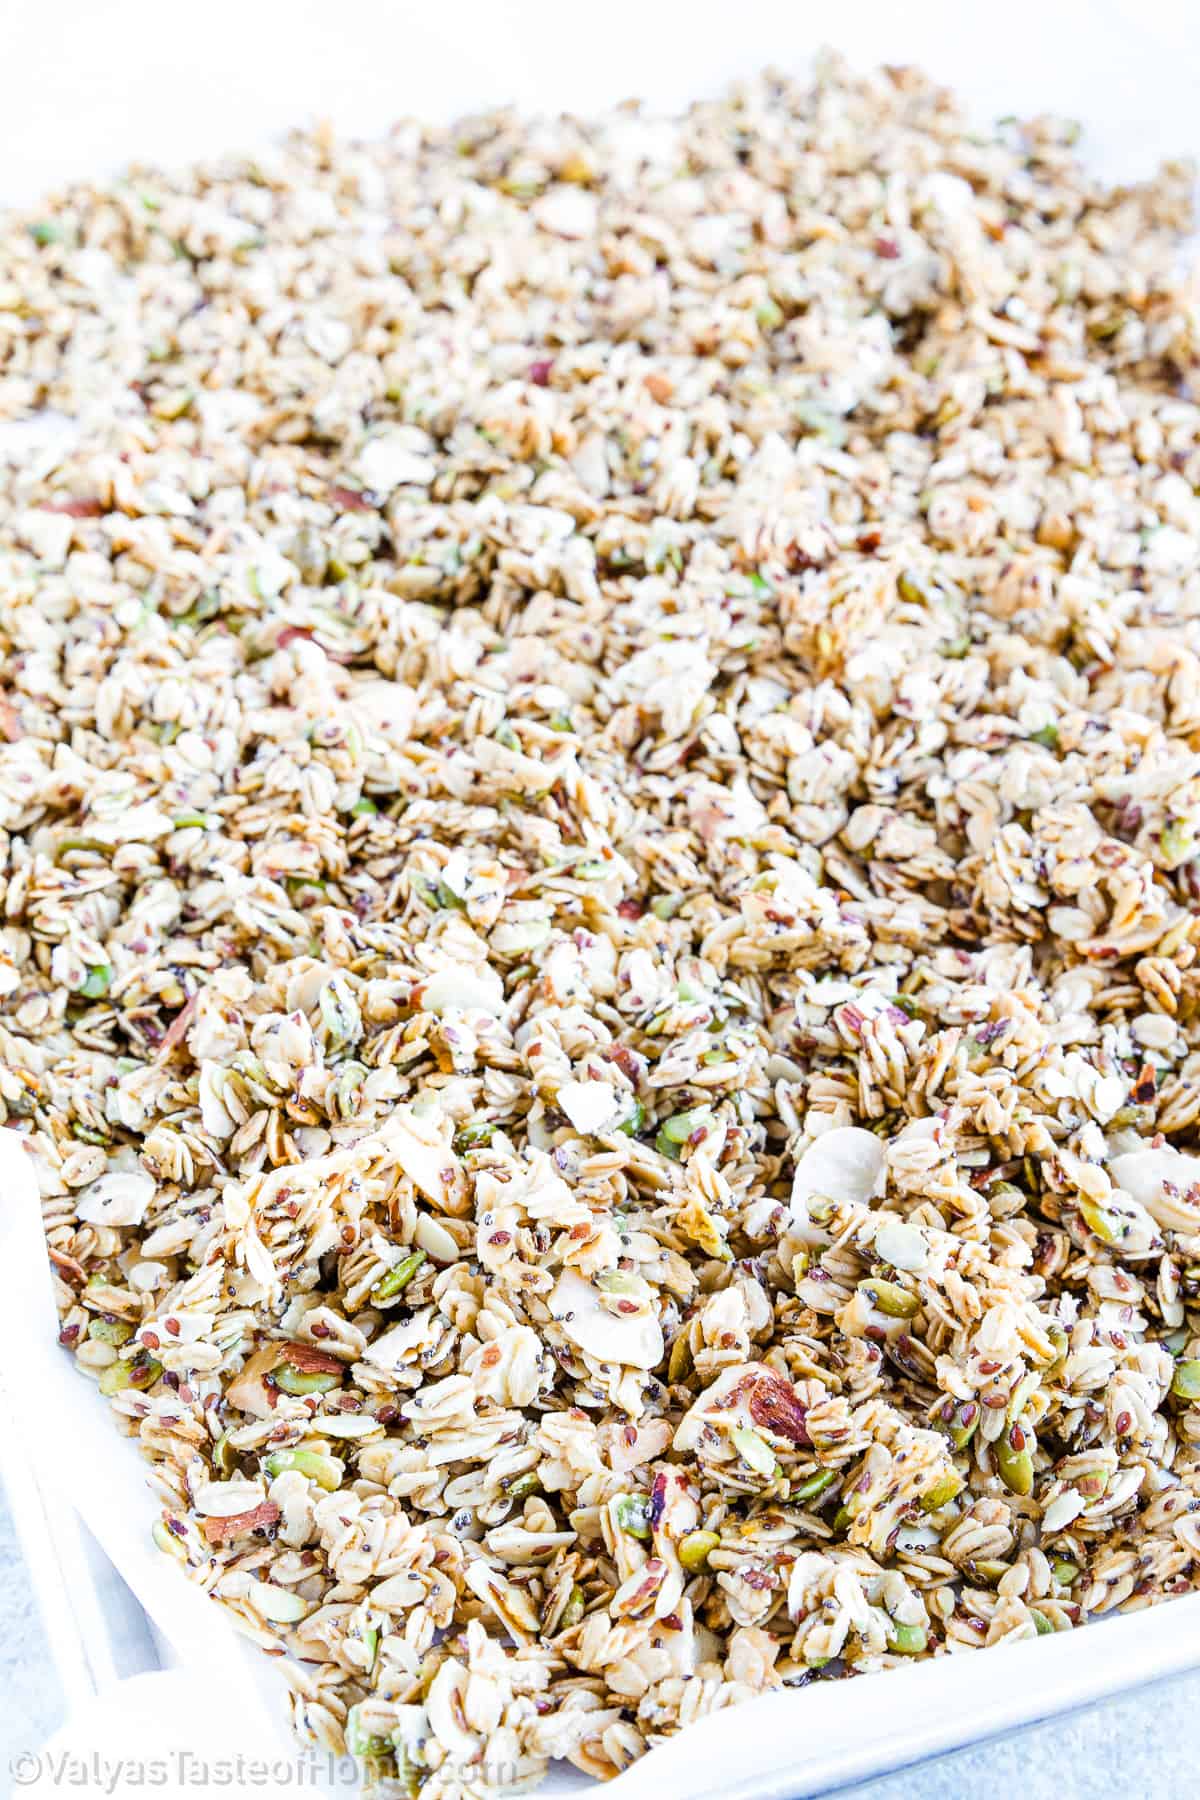  It’s a perfect blend of sweet and crunchy that you can enjoy for breakfast or as a snack anytime. It's incredibly easy to make and tastes far superior to store-bought versions.